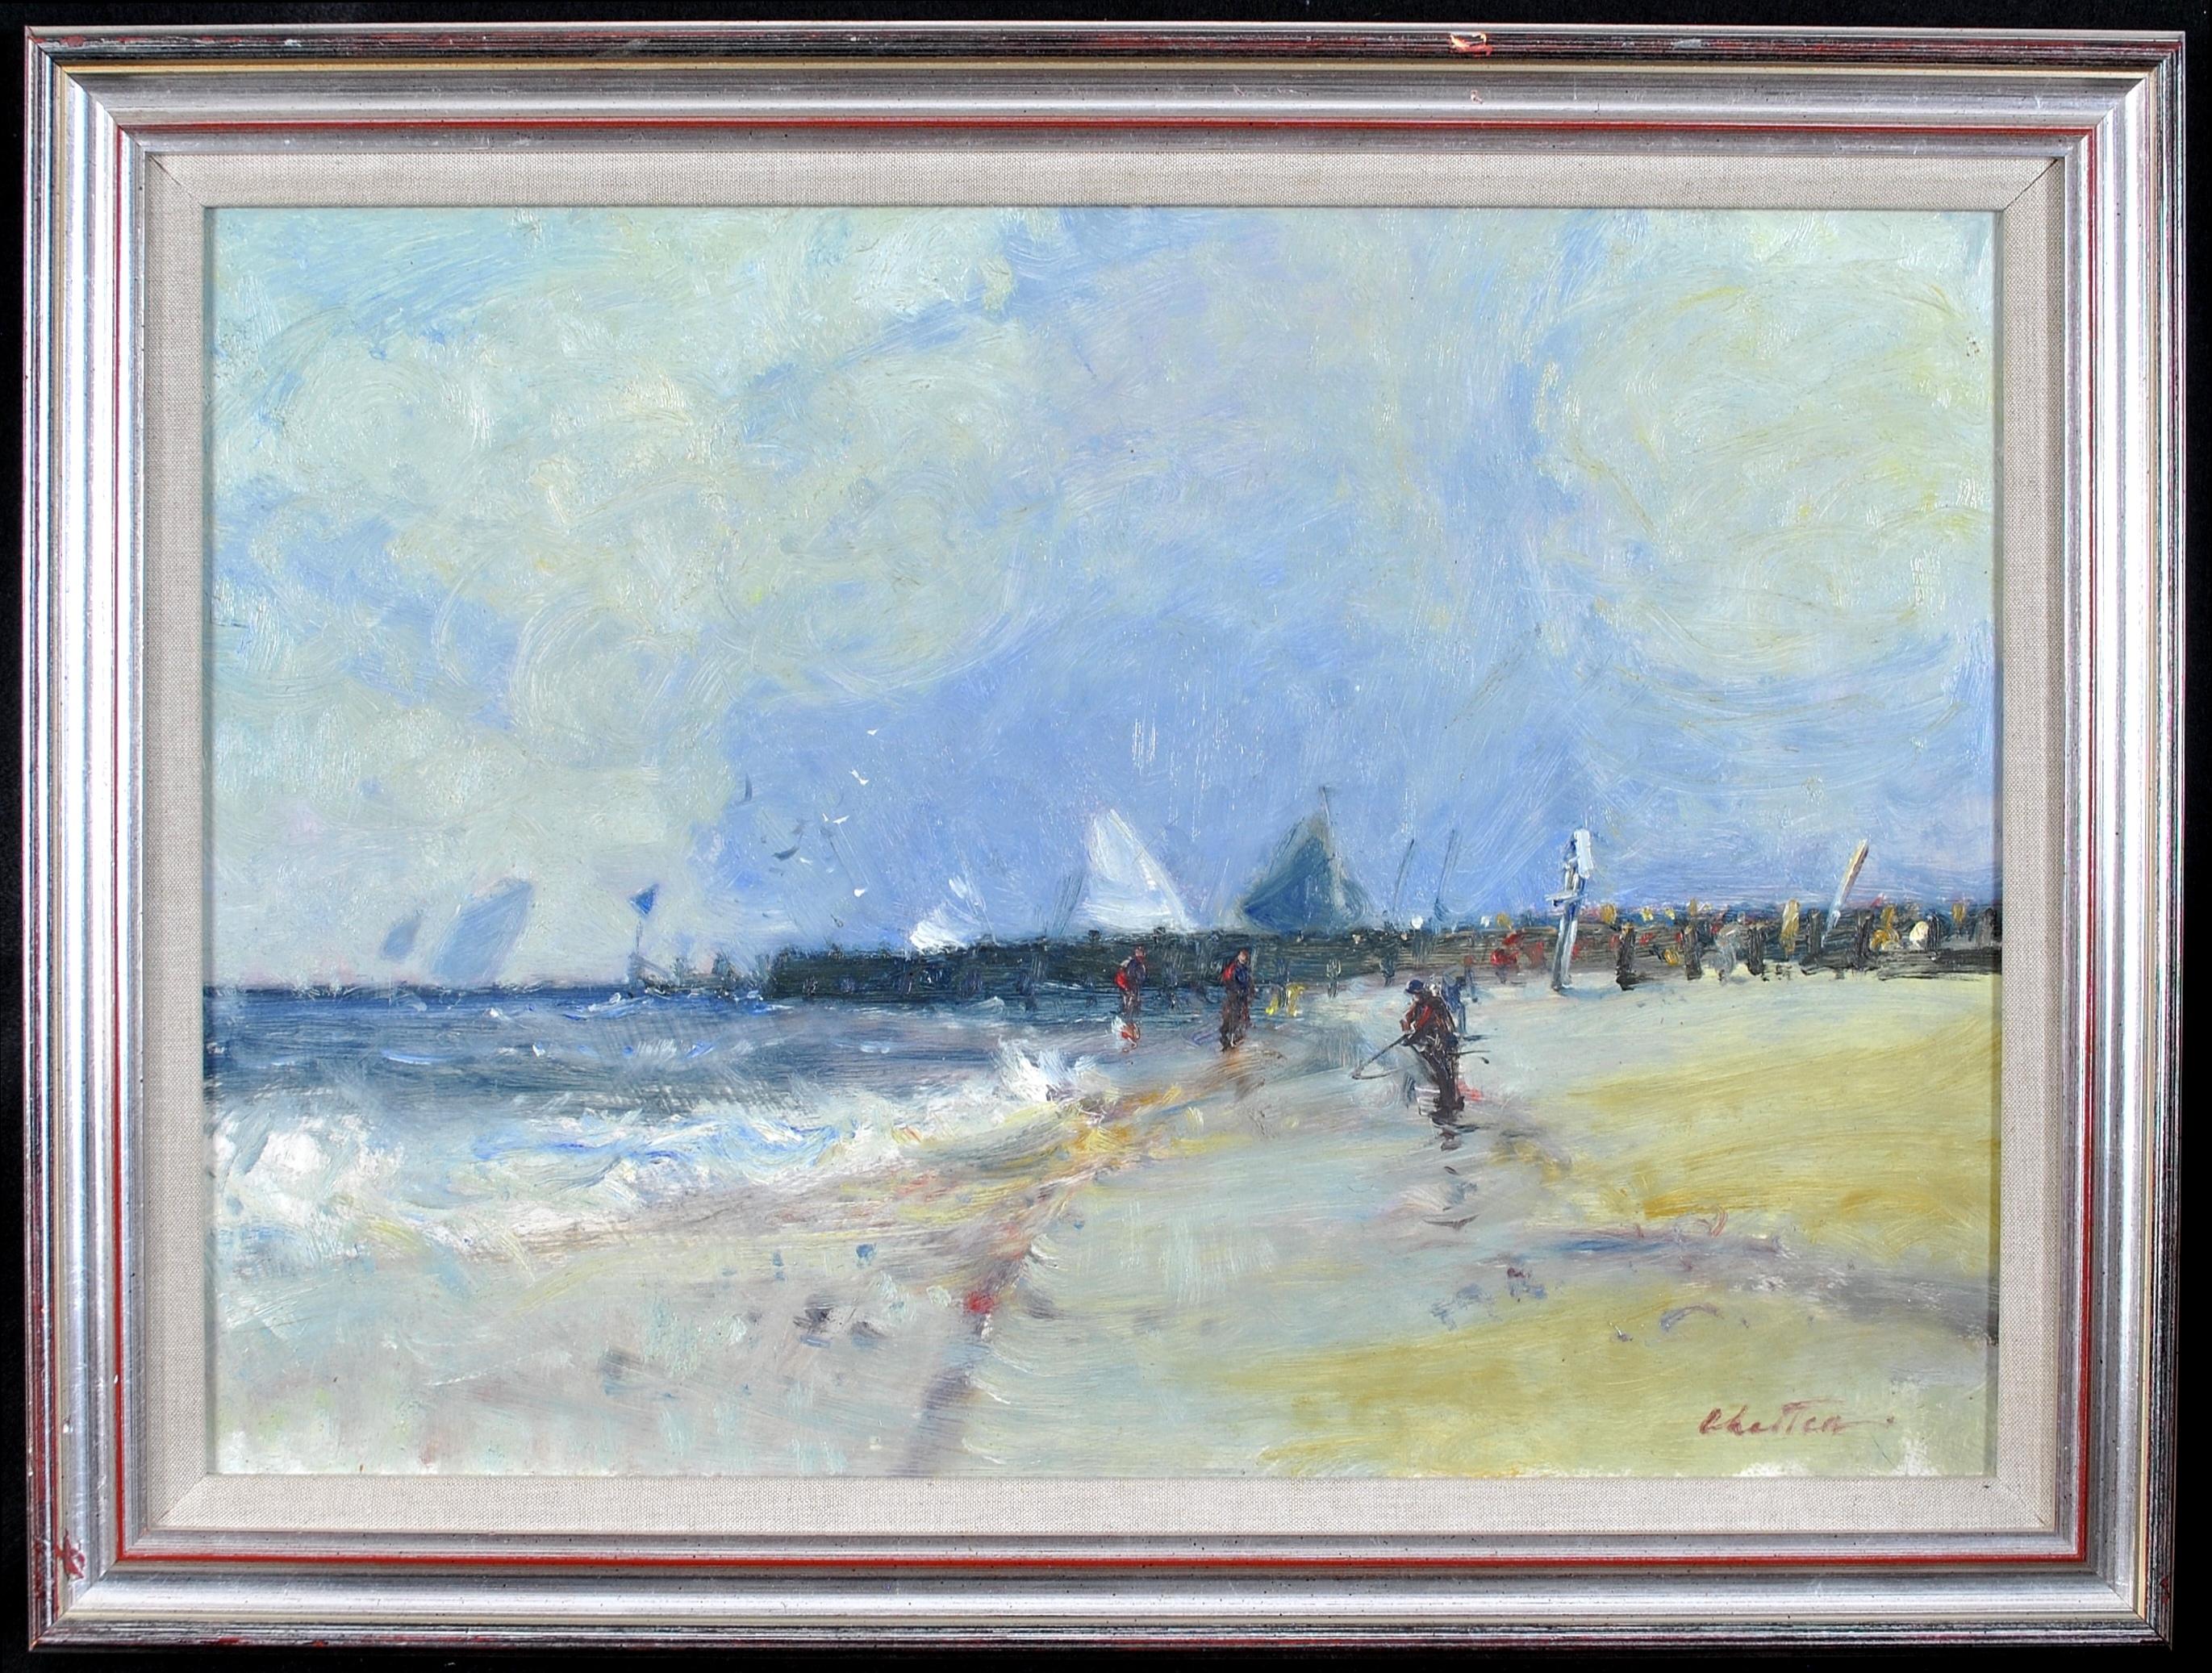 Geoffrey Chatten Landscape Painting - The Beach Groyne - English Impressionist Seascape, Oil on Board Painting